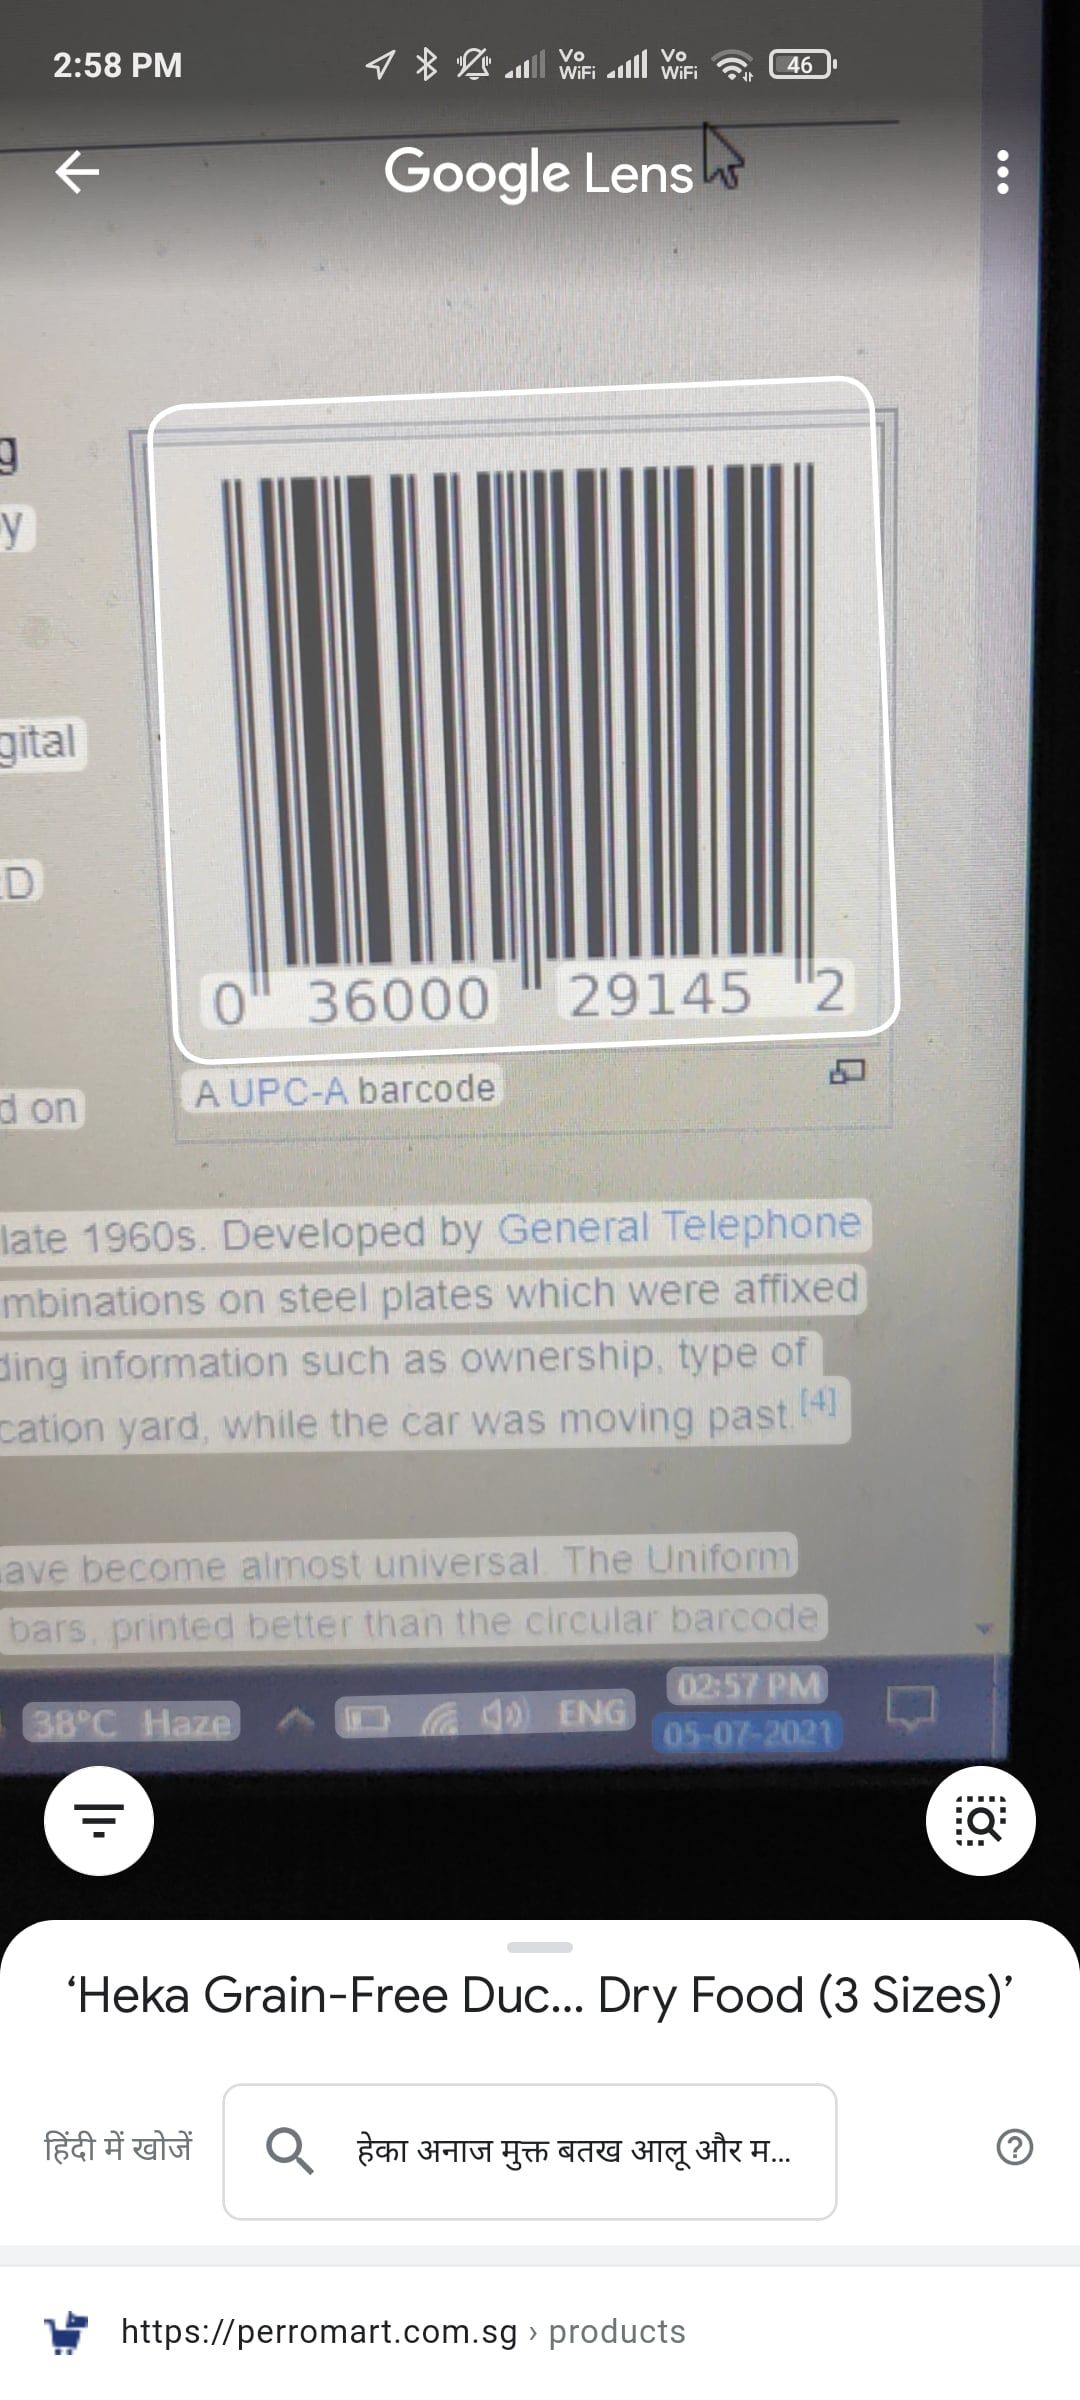 You can swipe up from the bottom to bring the barcode search results